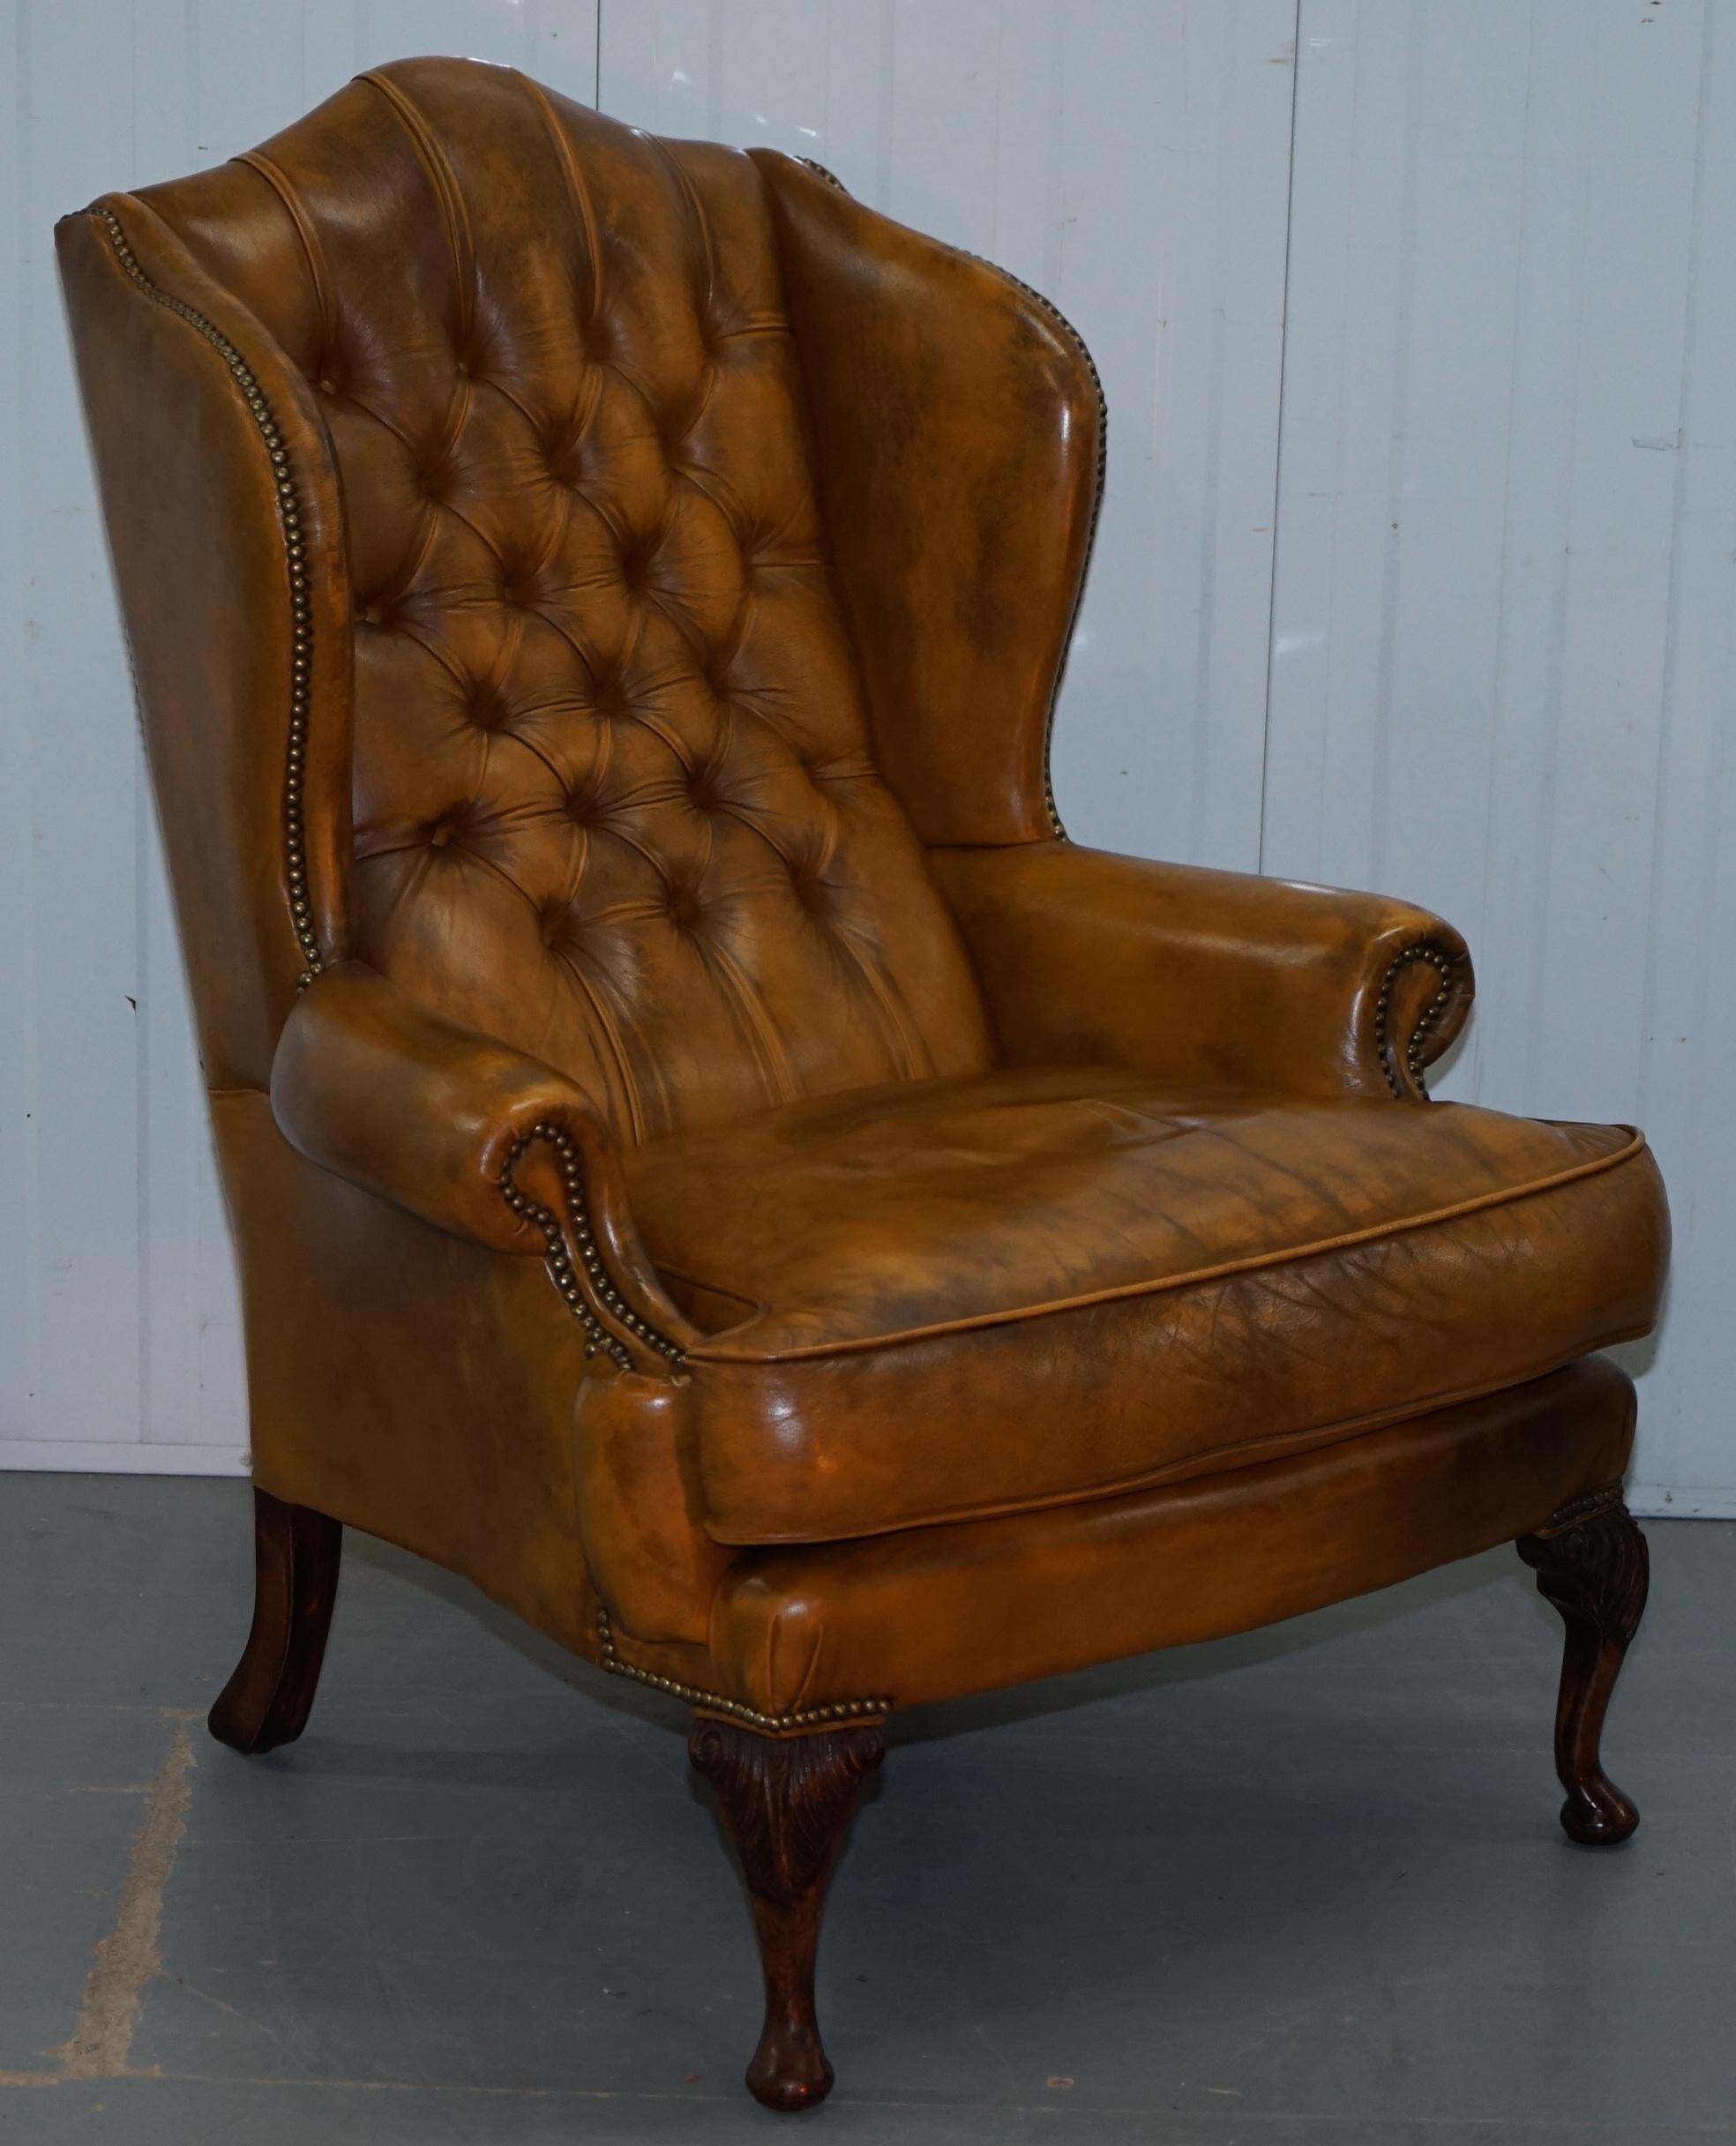 We are delighted to offer for sale this stunning pair of William Morris style Victorian wingback armchairs in hand dyed brown leather with matching footstool.

If you’re looking for a very rare model pair of wingback armchairs that scream English